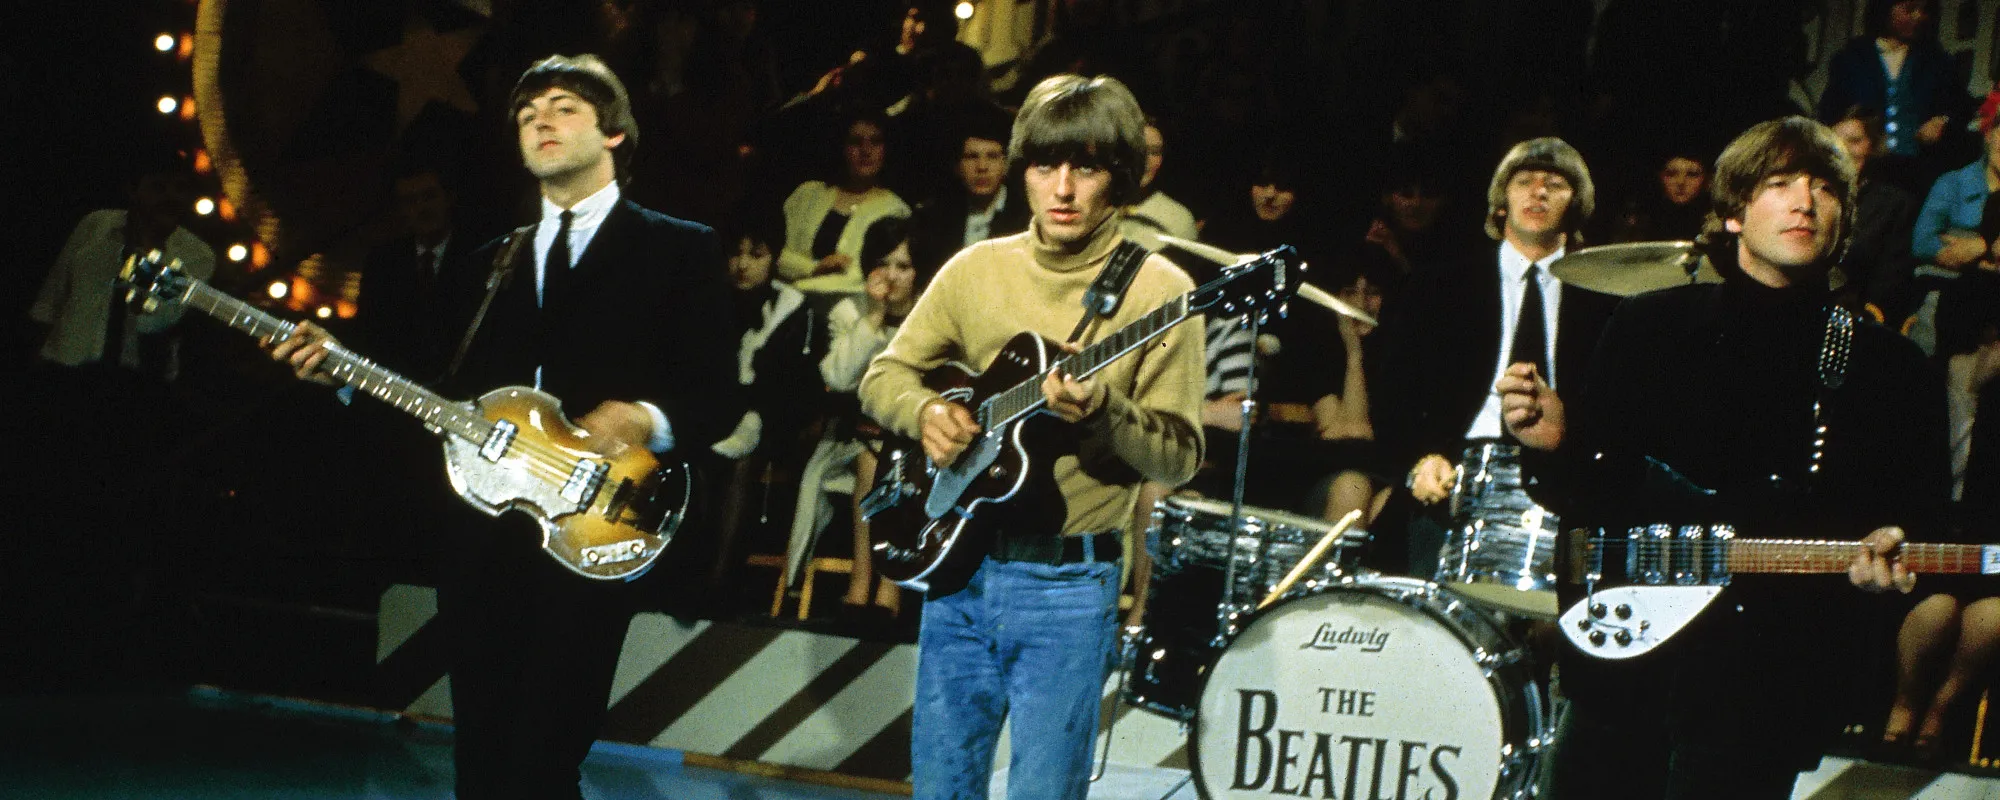 The Story Behind “In My Life” by The Beatles and the Bus Ride that Inspired It